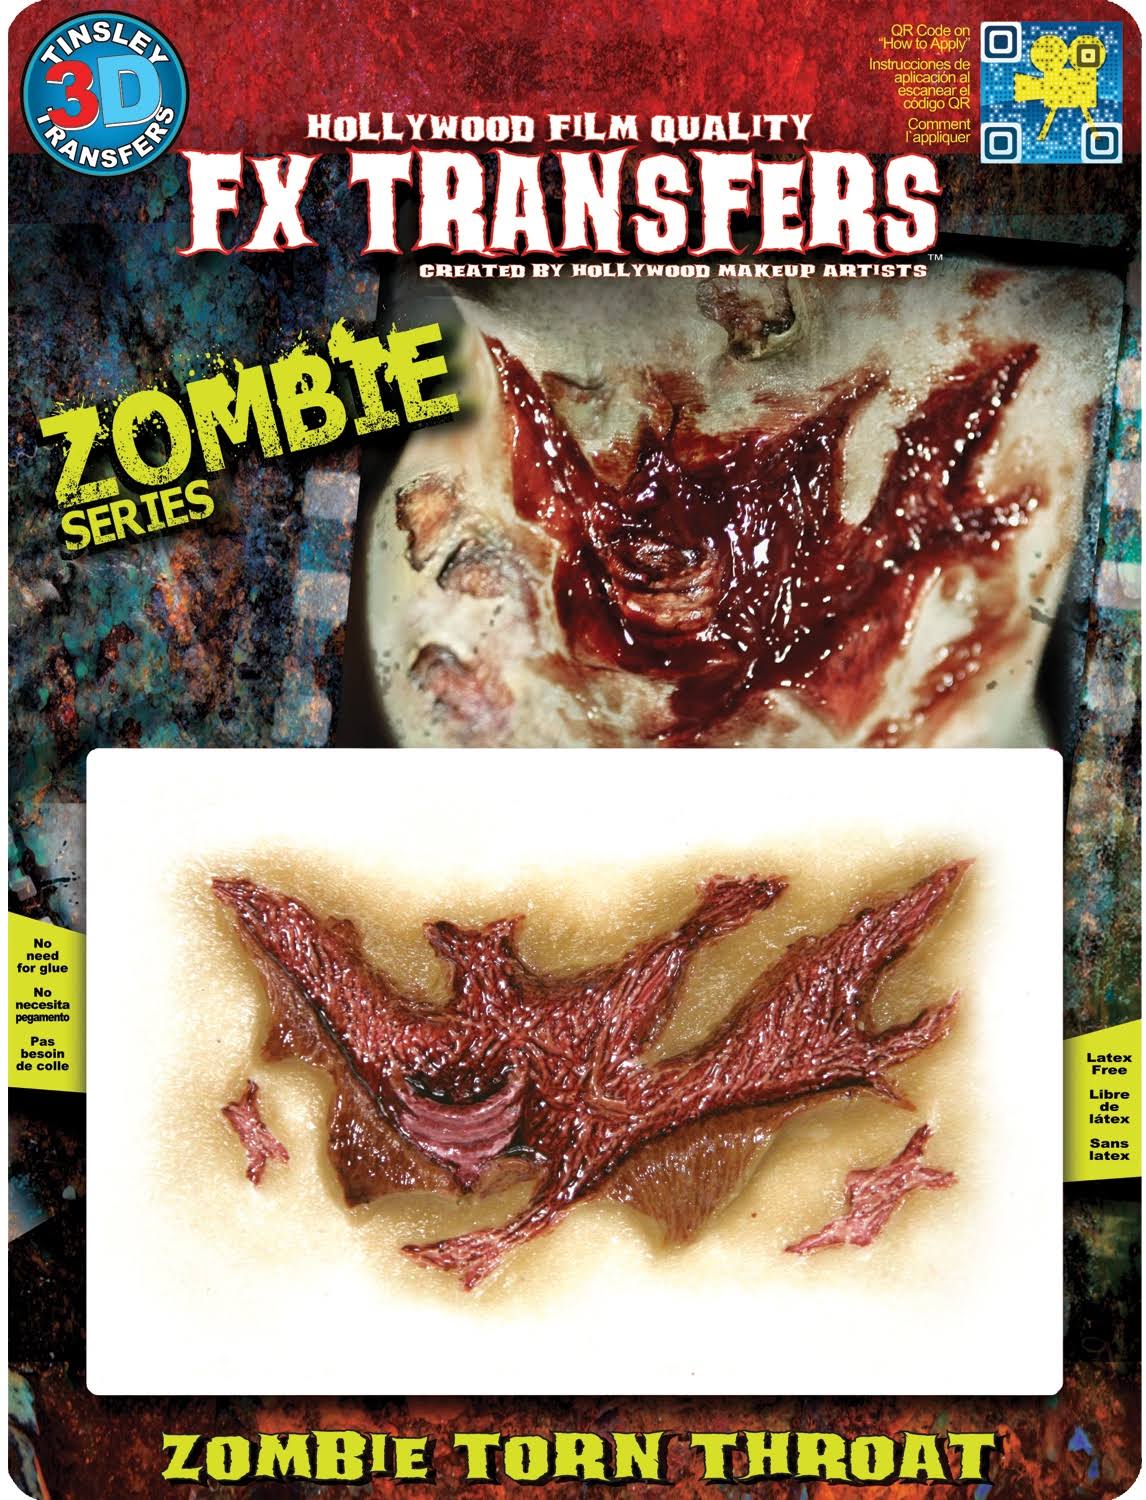 Tinsley Transfers FX Transfers 3D Zombie Throat Wound Makeup Kit